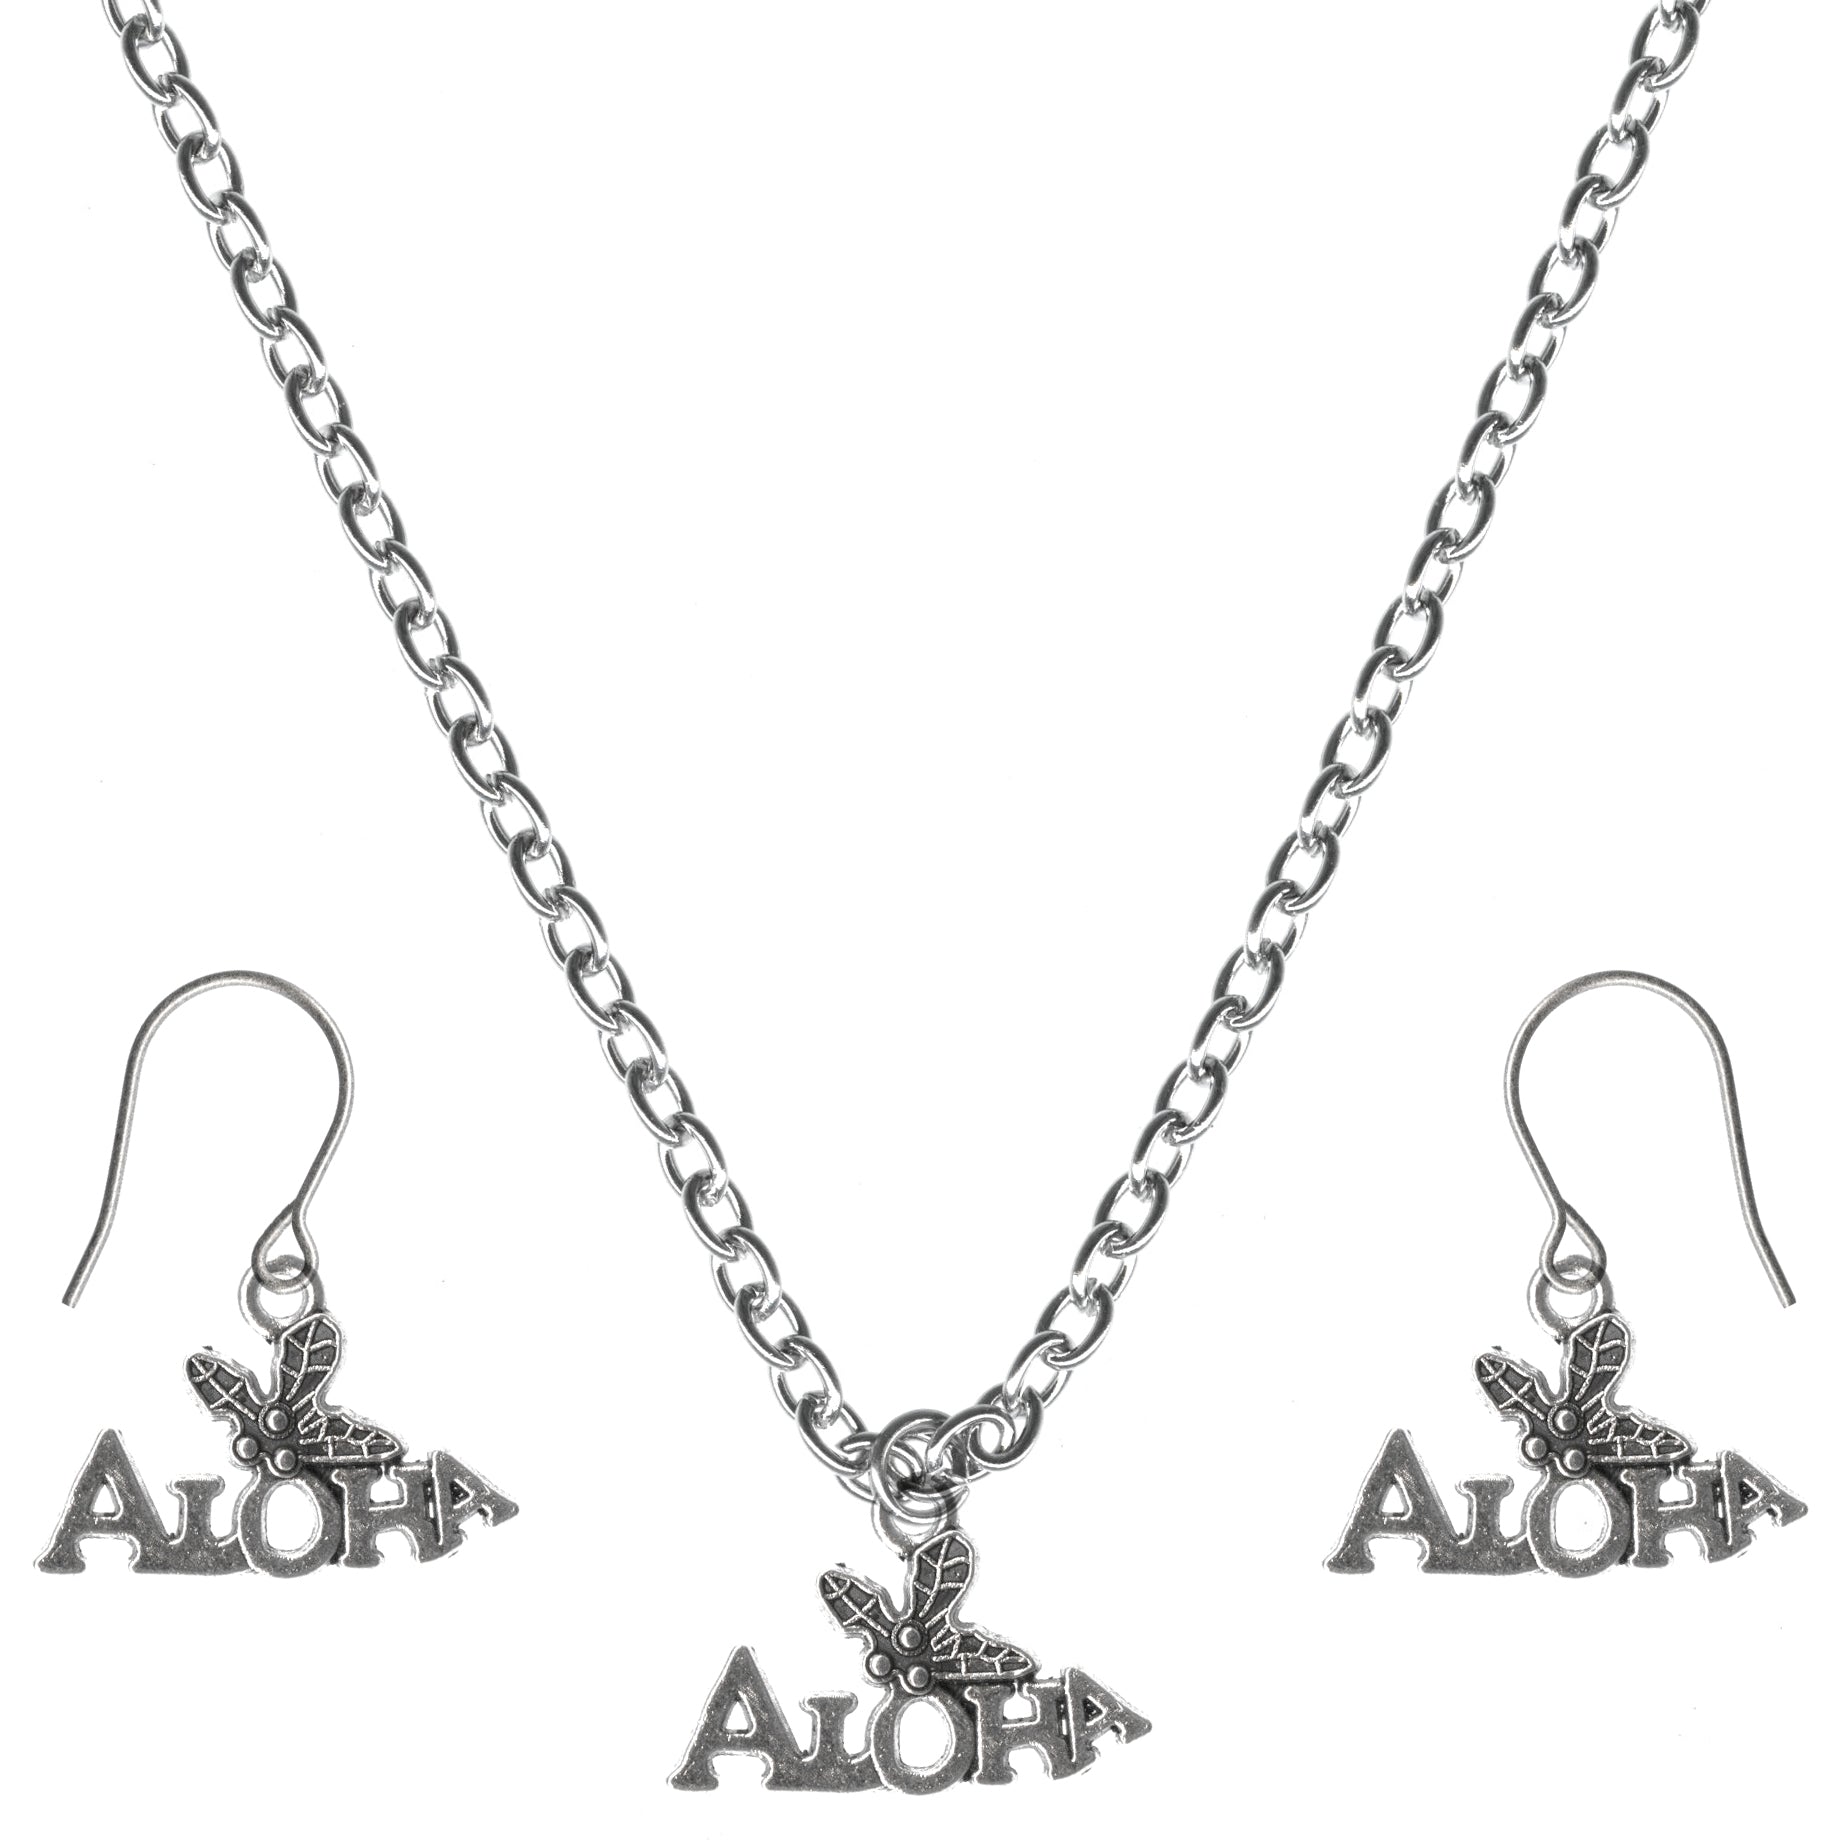 Aloha Charm Steel Chain Necklace and Hypoallergenic Titanium Earrings Set